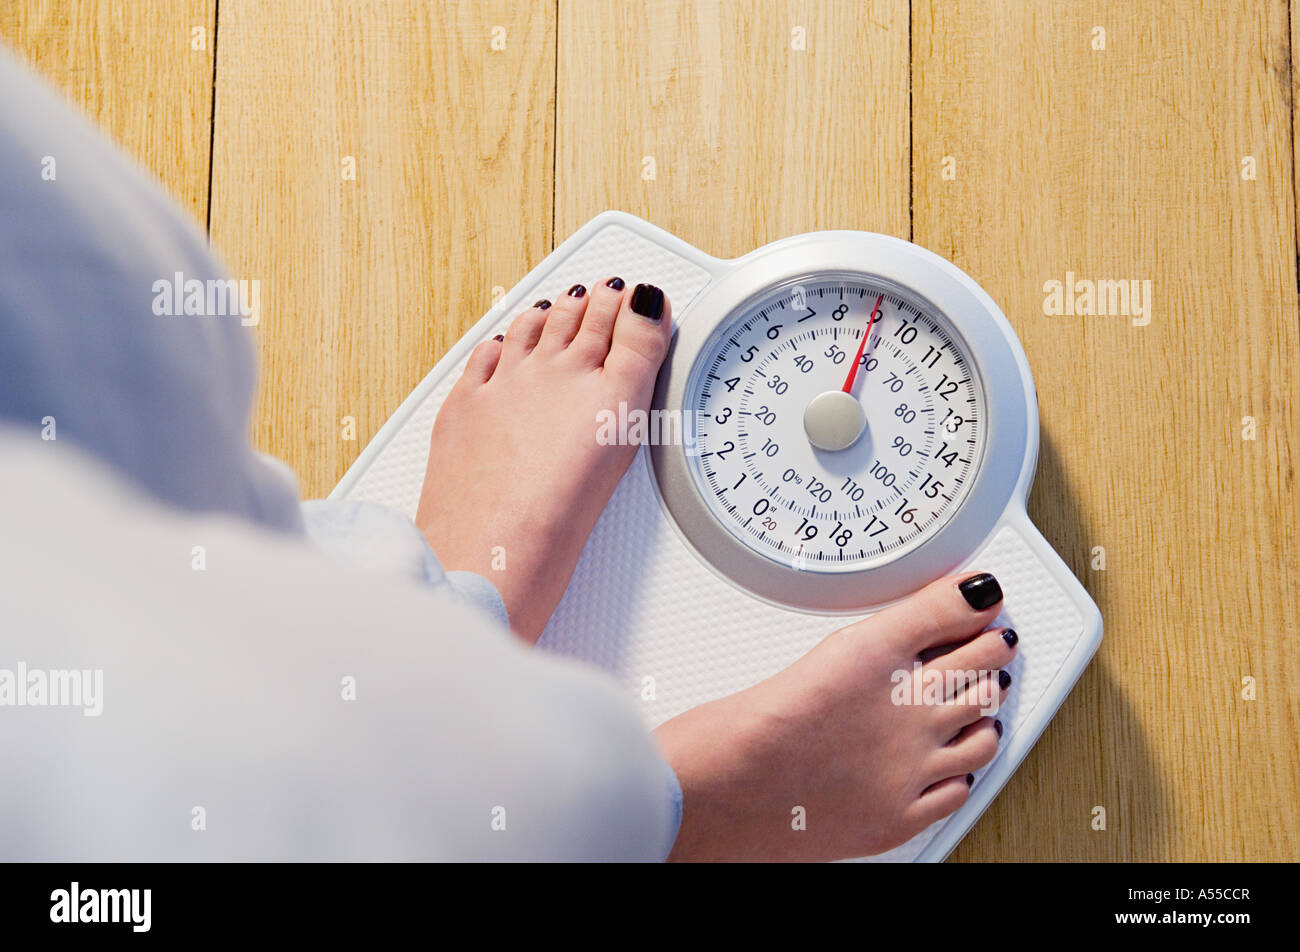 https://c8.alamy.com/comp/A55CCR/woman-standing-on-weight-scales-A55CCR.jpg